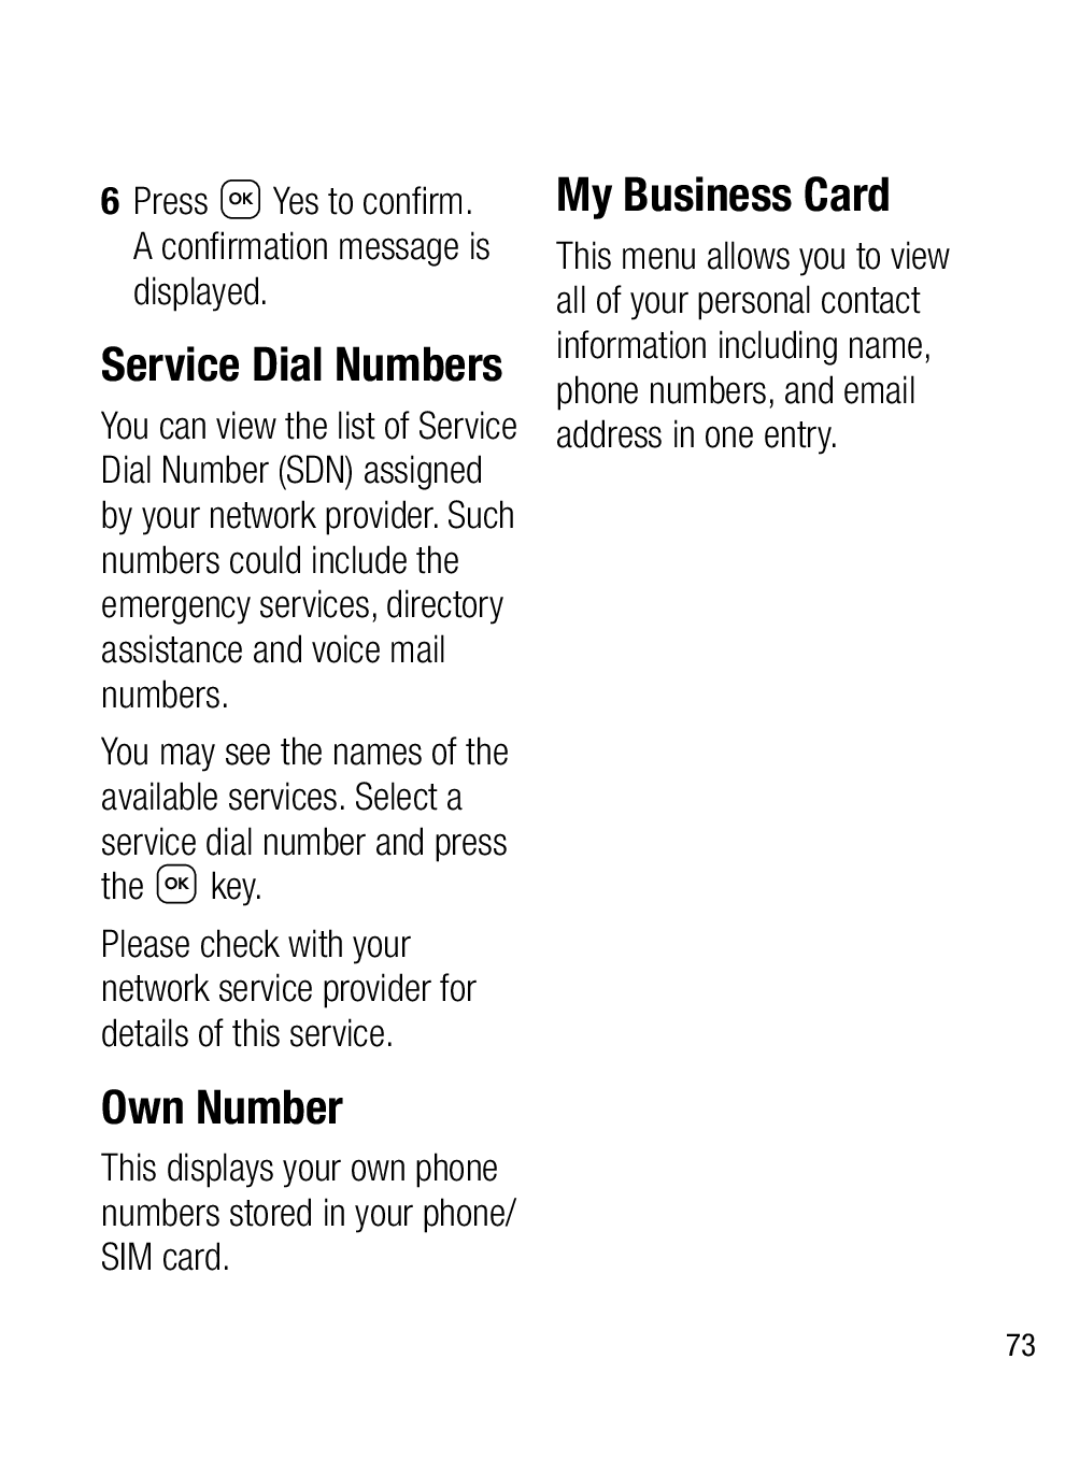 LG Electronics A133CH manual Service Dial Numbers, Own Number, My Business Card 